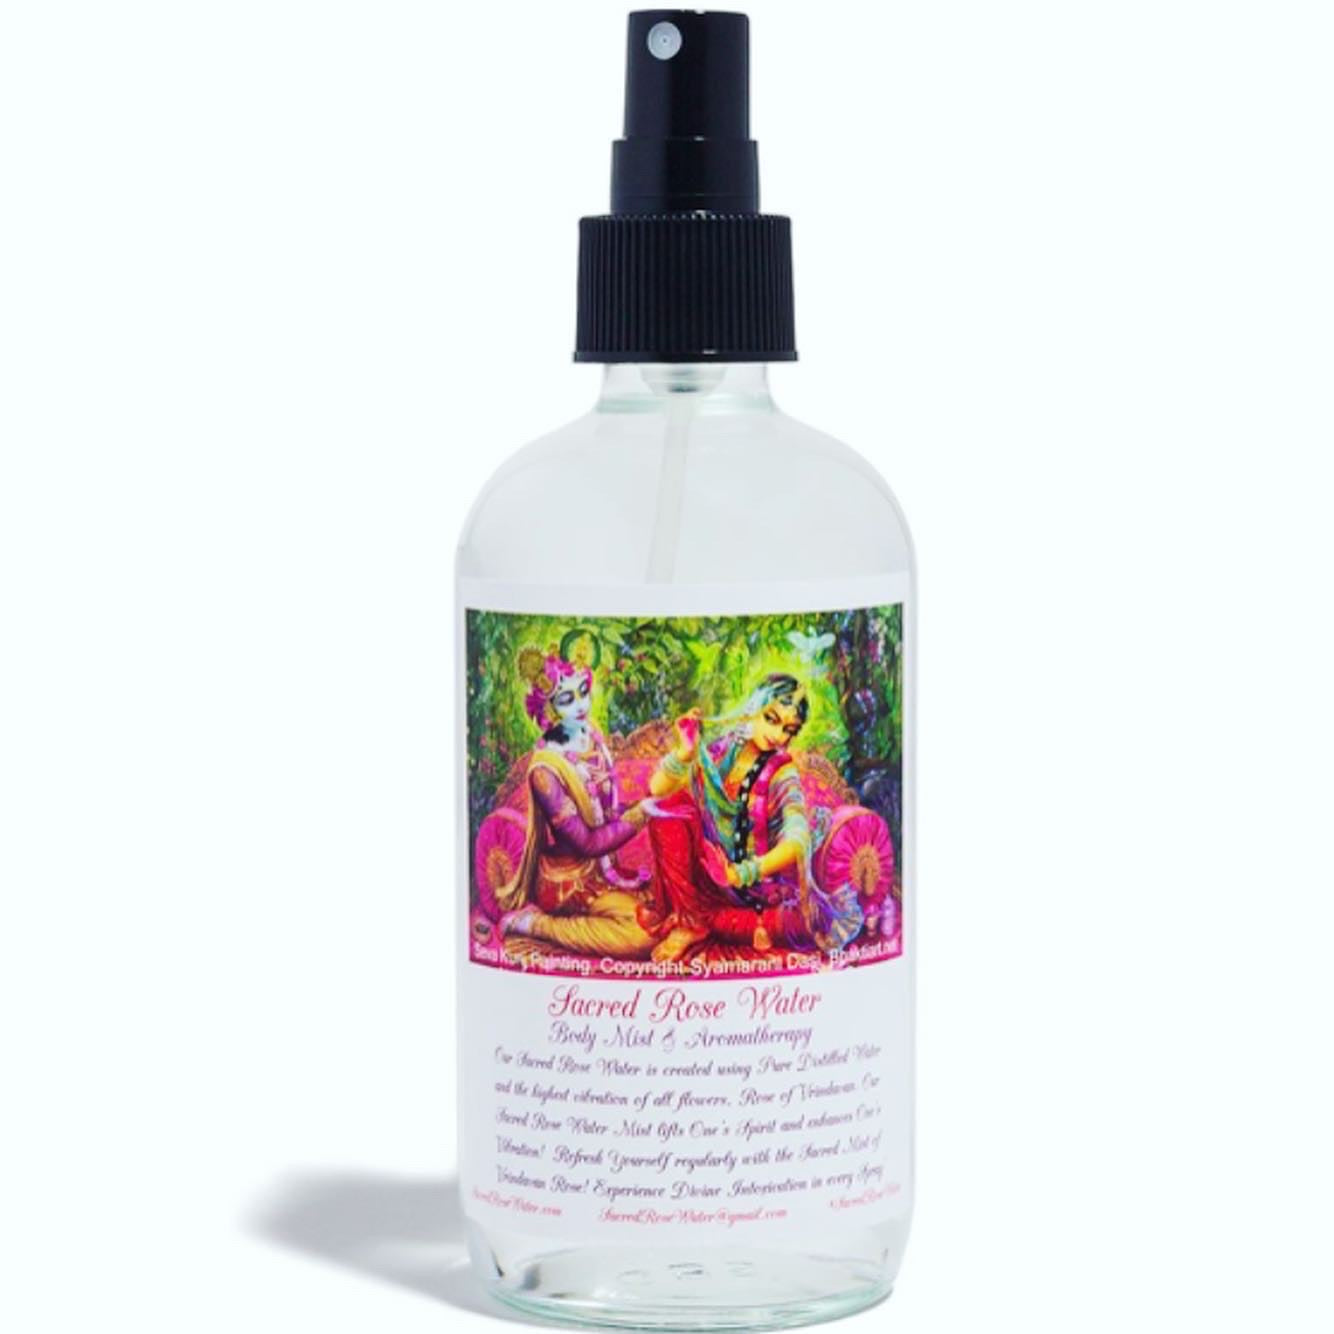 "The Aromatherapy Benefits of Sacred Rose Water BodyMist"